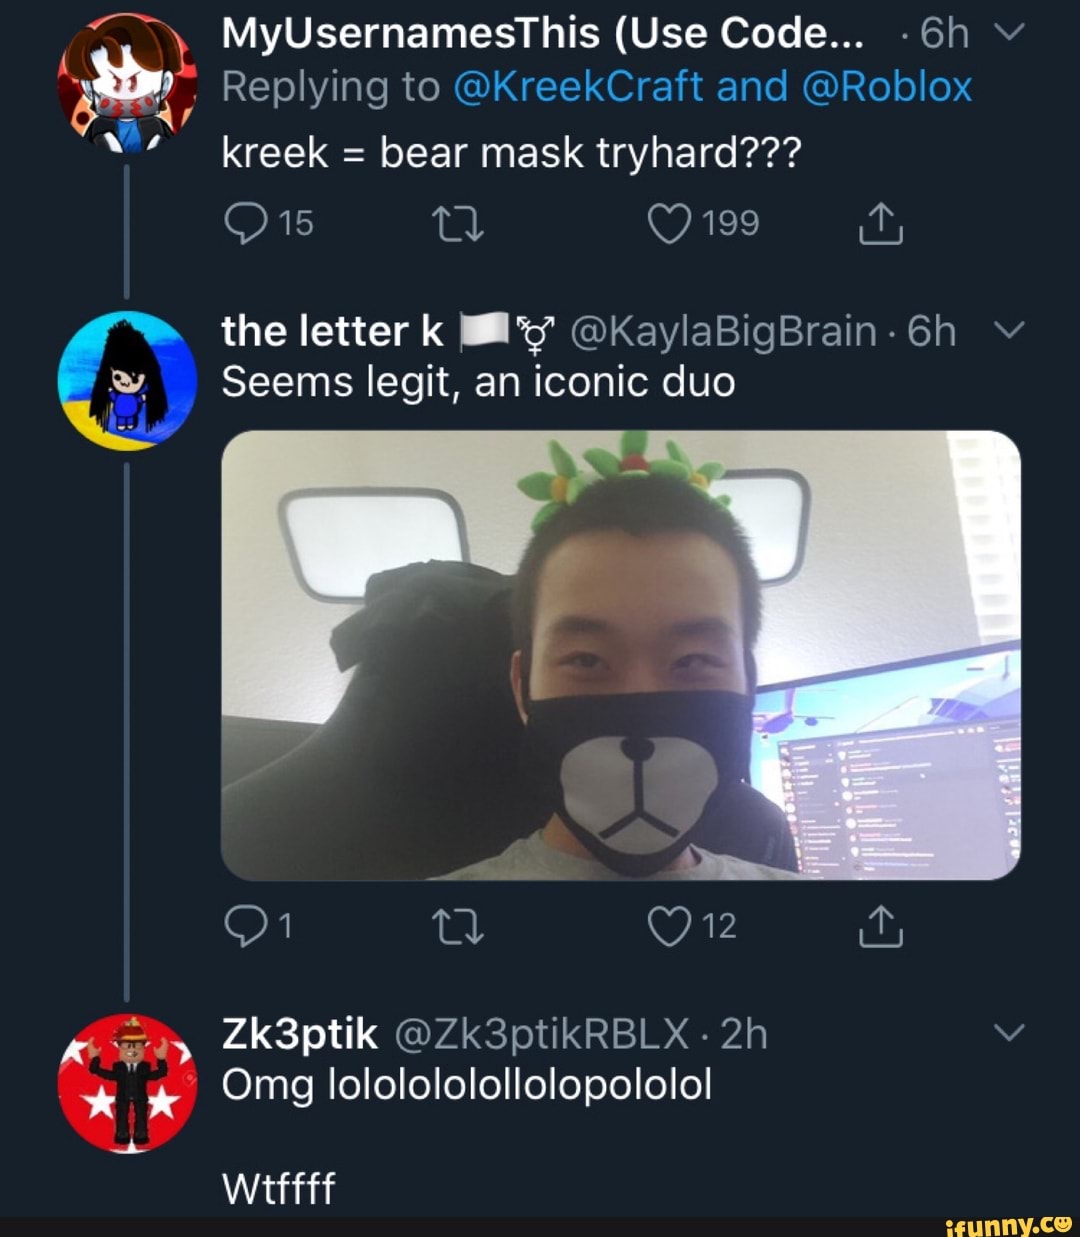 Myusernamesthis Use Code 6h Replying To Kreekcraft And Roblox Kreek Bear Mask Tryhard The Letter K By Okaylabigbrain 6h Y Seems Legit An Iconic Duo Omg Lololololollolopololo Ifunny - code for bear mask roblox